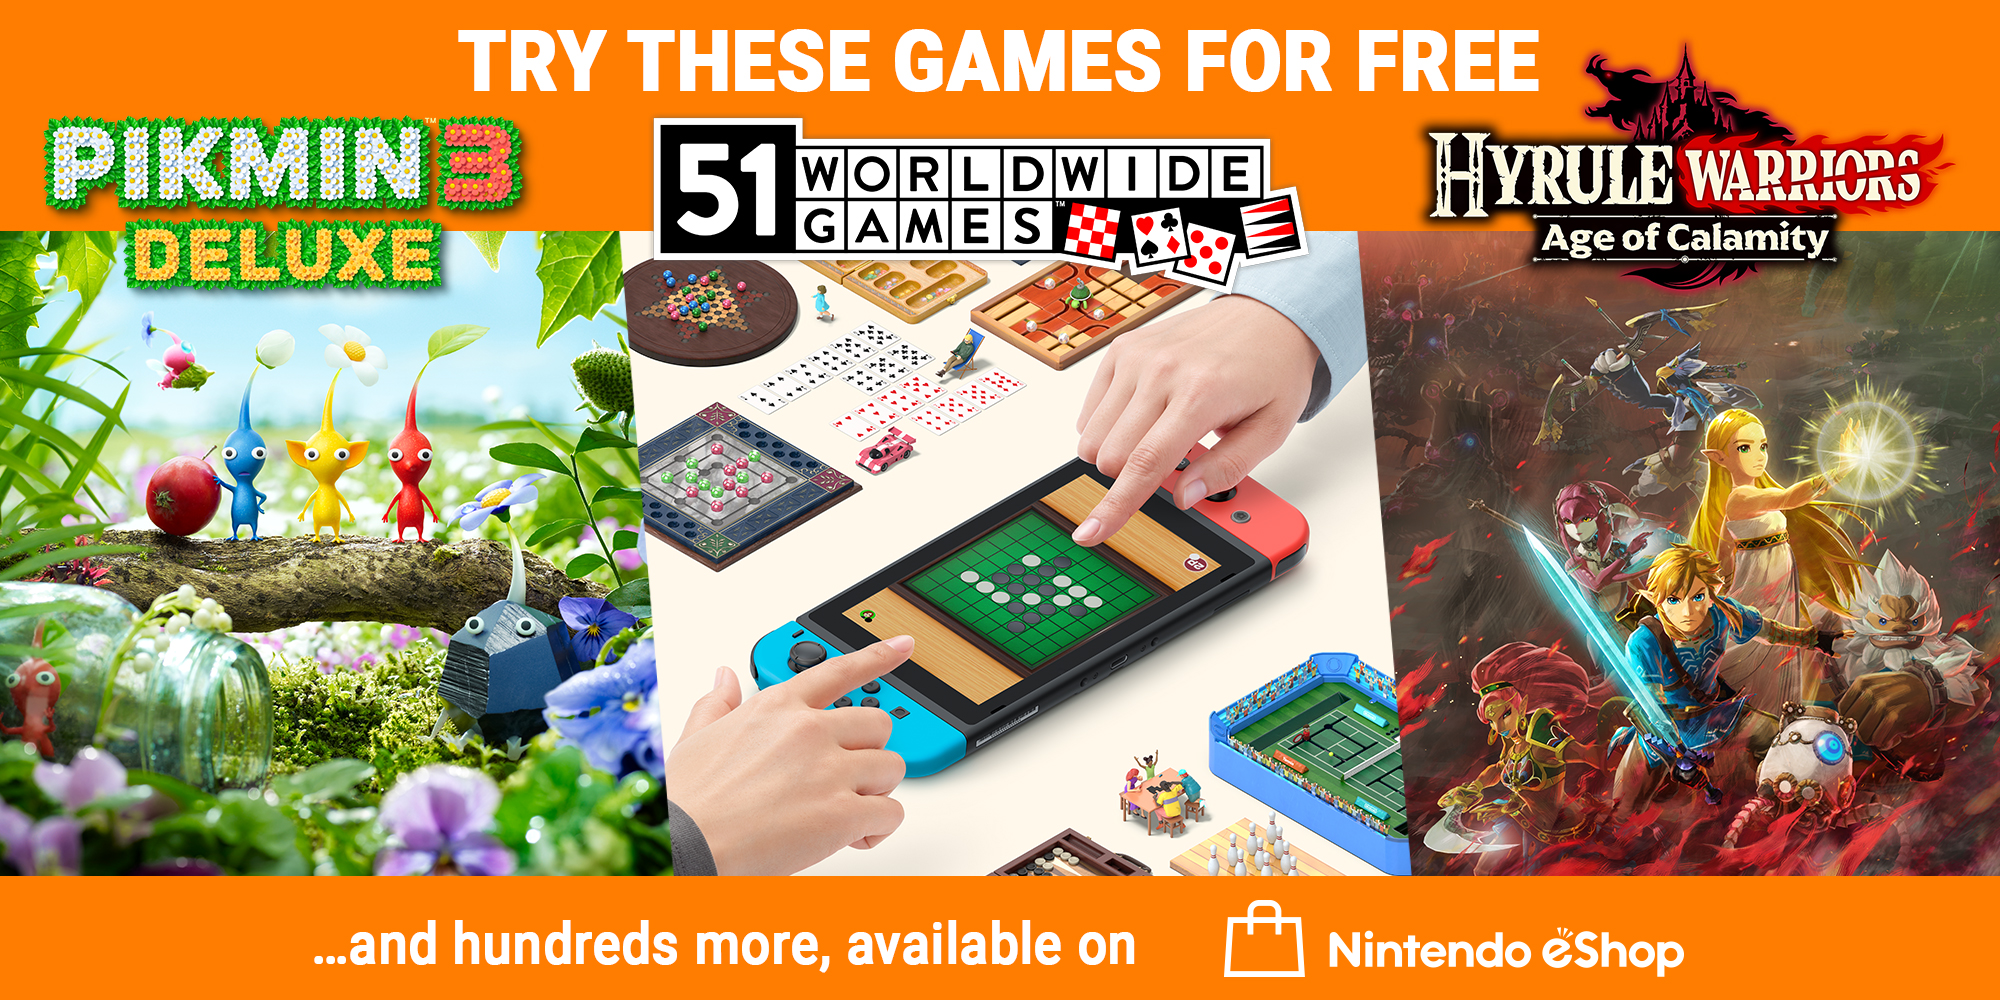 Try three great games for free on Nintendo Switch!